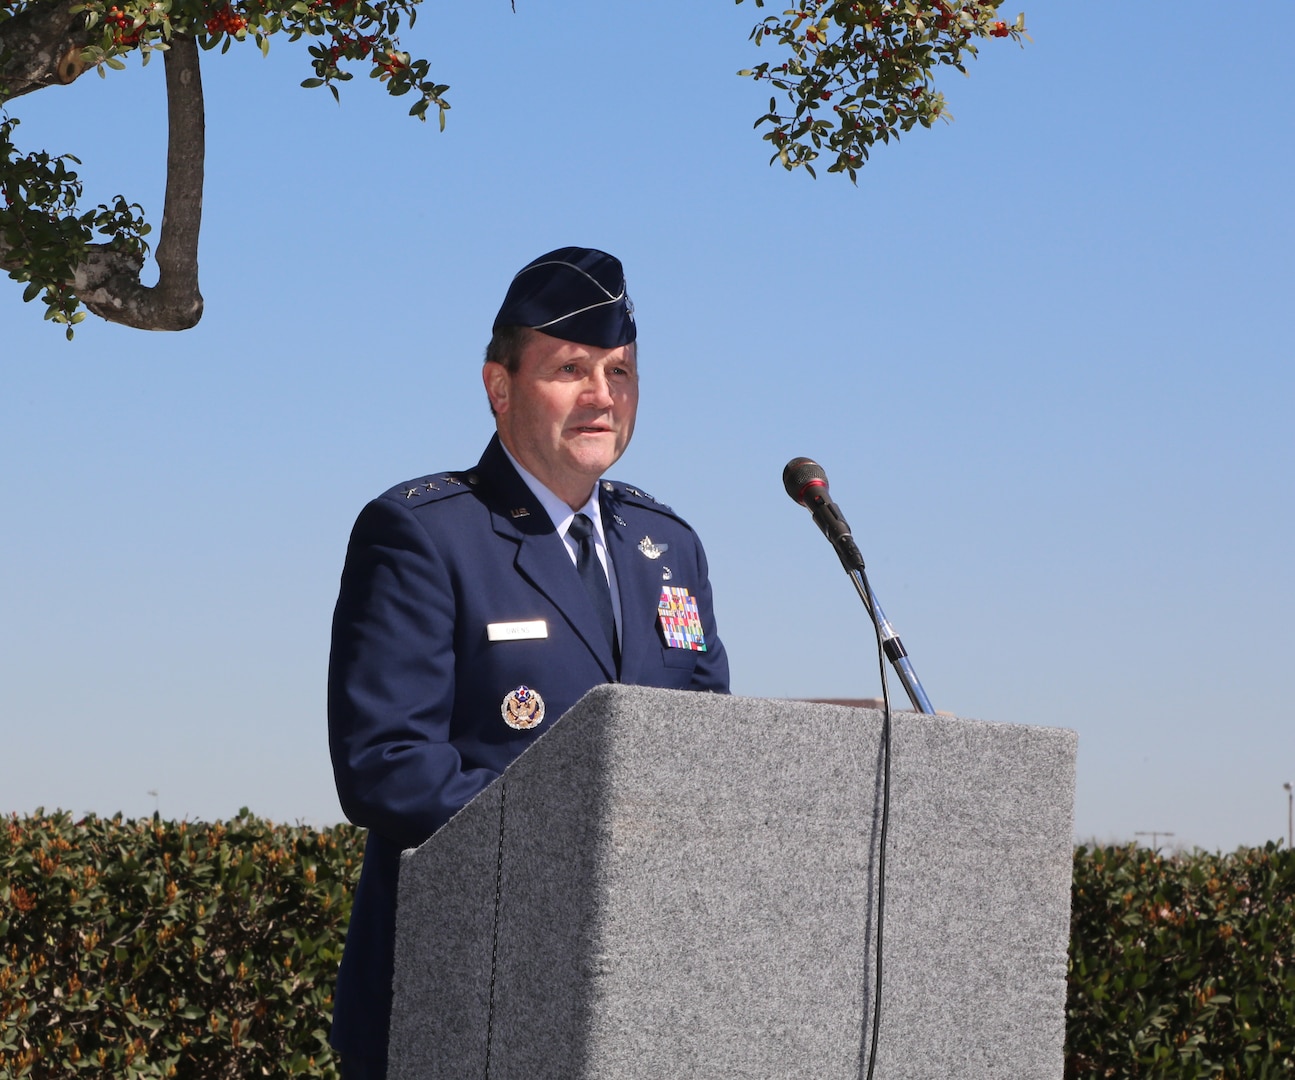 Lt. Gen. Douglas H. Owens, Air Education and Training command vice commander, was the keynote speaker for the annual ceremony that commemorates the first military flight. Hosted by the Order of Daedalians Stinsons Flight No. 2 since 1978, the event was held at Joint Base San Antonio-Fort Sam Houston parade grounds March 1.  Flown by Lt. Benjamin Foulois March 2, 1910, the flight took place over the parade grounds at JBSA-Fort Sam Houston. Lieutenant Foulois' orders were to "teach himself to fly" in the only military aeroplane in existence at that time. His first flight lasted seven and one-half minutes and he flew the Wright "B" Flyer to 100 feet before landing.  (U.S. Air Force photo by Rich McFadden)